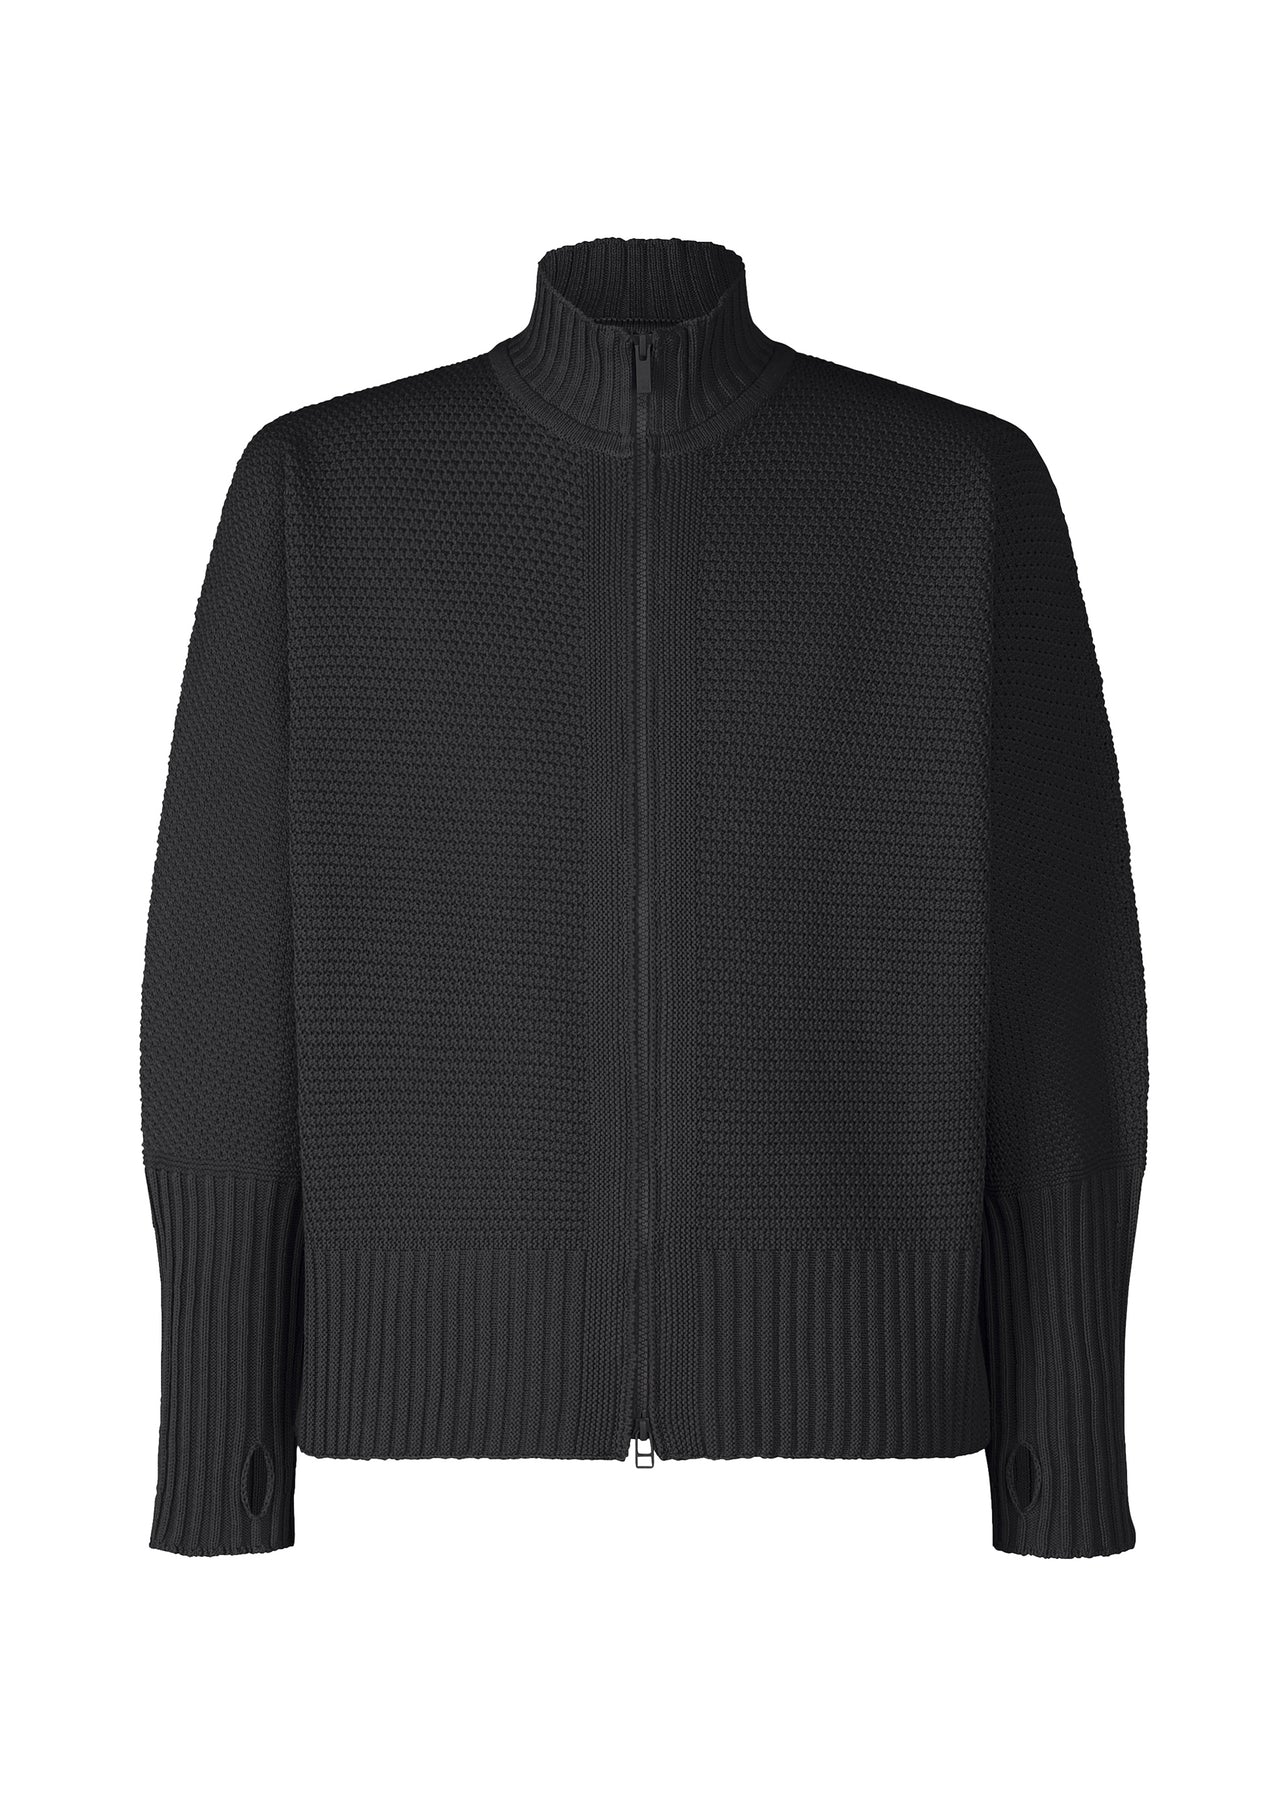 RUSTIC KNIT JACKET | The official ISSEY MIYAKE ONLINE STORE